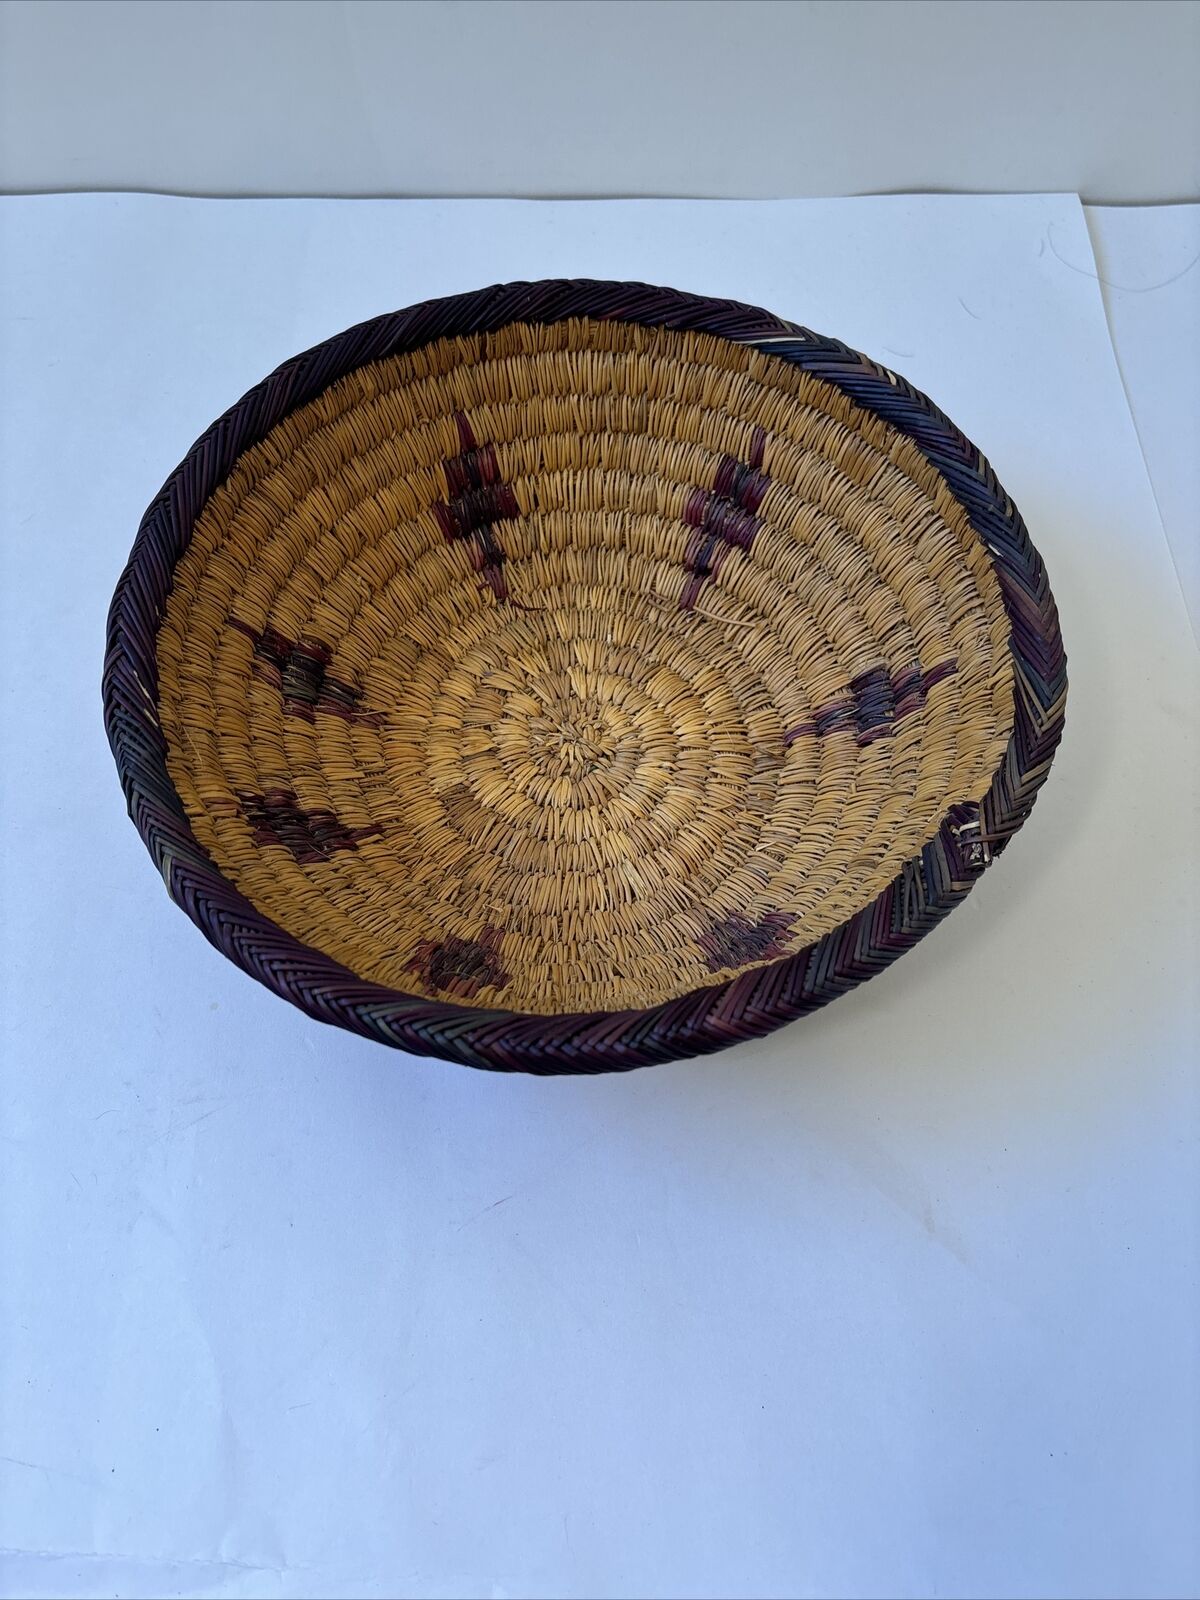 Unbranded Woven Coil Round Basket w/ Pattern Table Decor Fruit Bowl